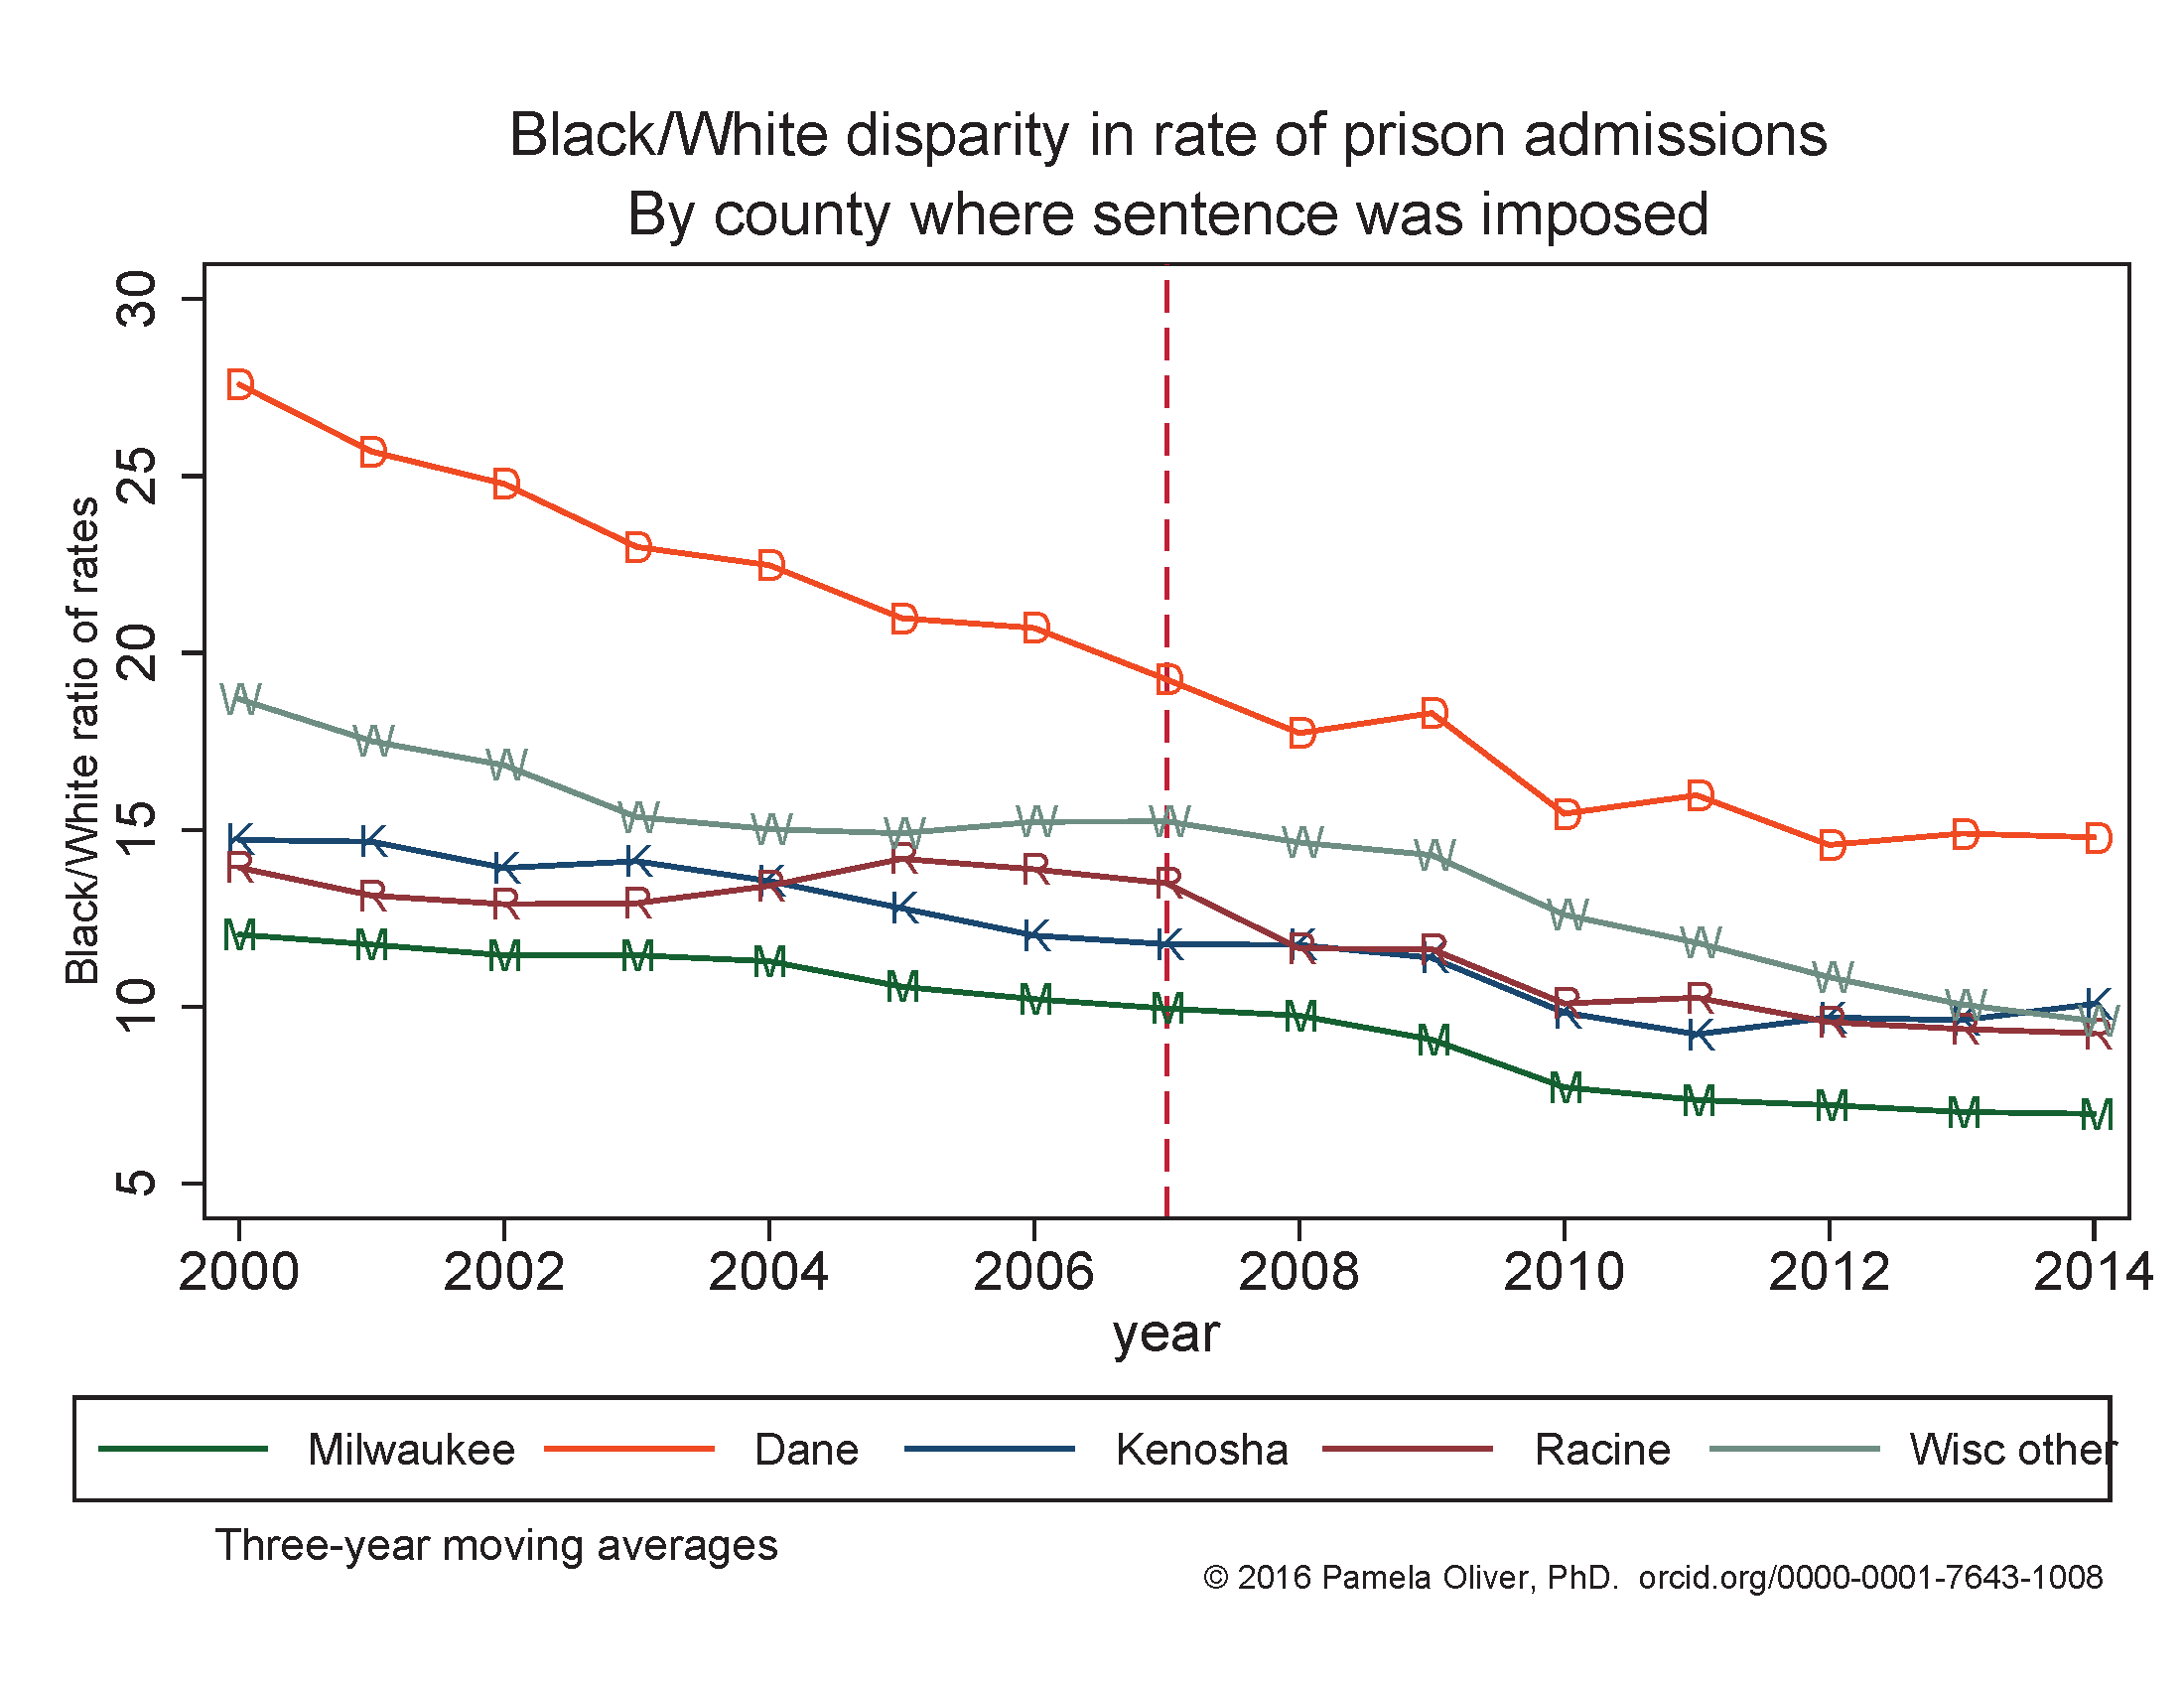 Black/White disparity in prison admission rates by Wisconsin County